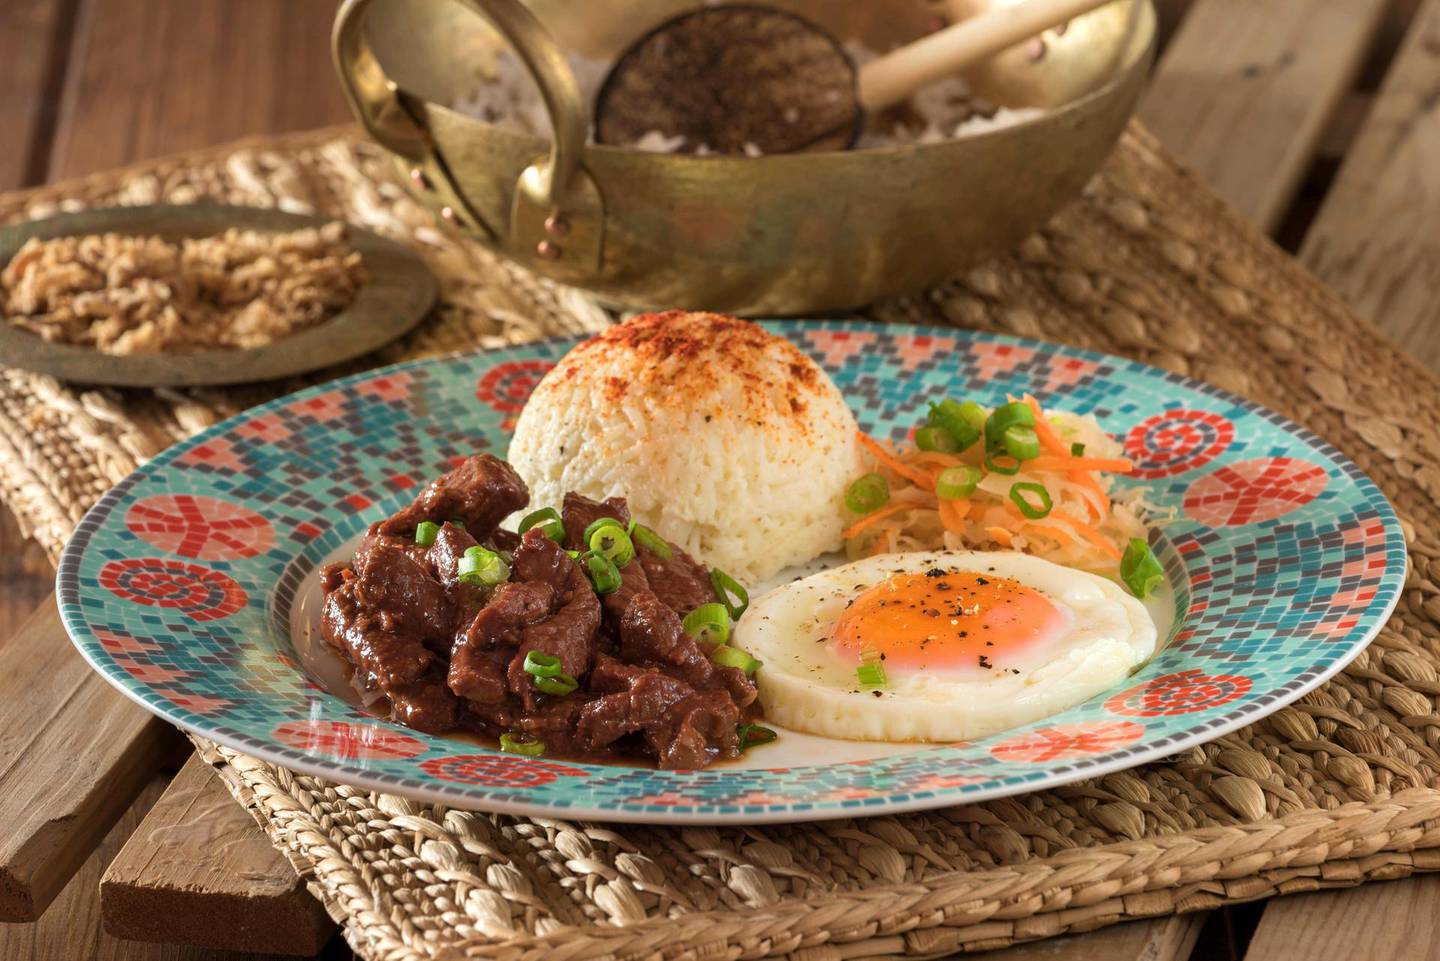 H6A52F Tapsilog. Filipino breakfast dish with beef, egg and fried rice. Philippines Food